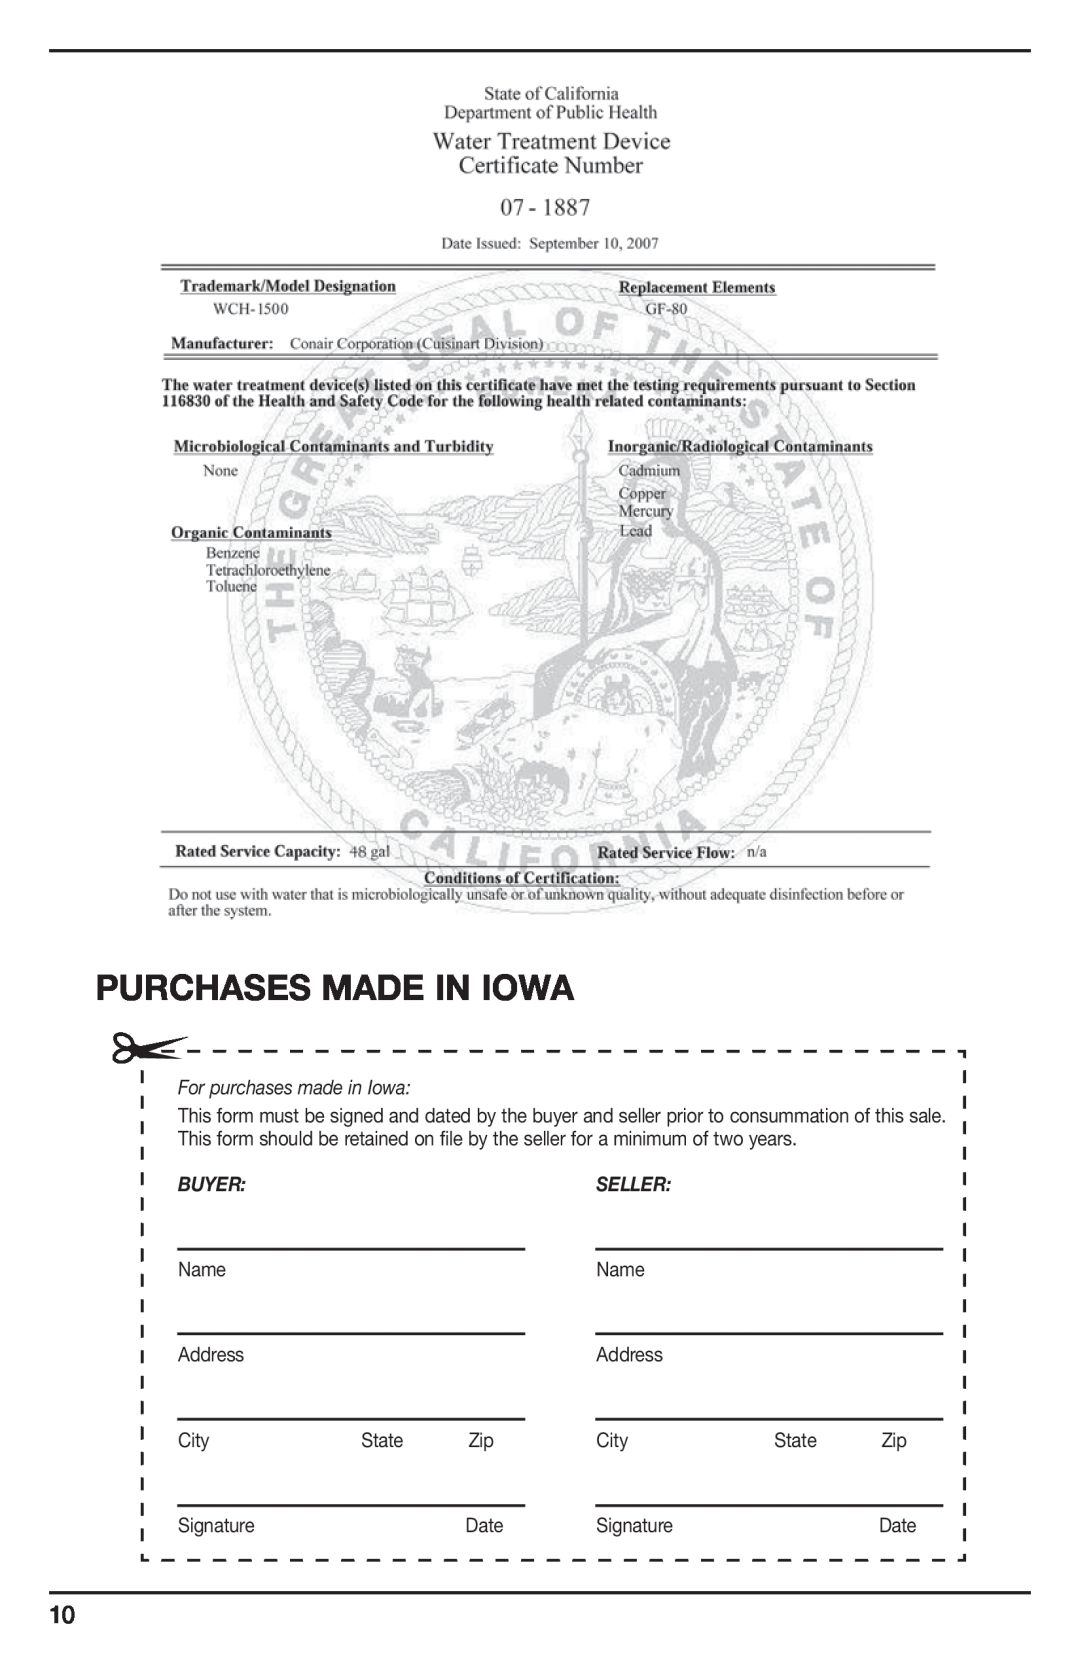 Cuisinart IB-8896B Purchases Made In Iowa, For purchases made in Iowa, Buyer:Seller, Name, Address, City, State, Signature 